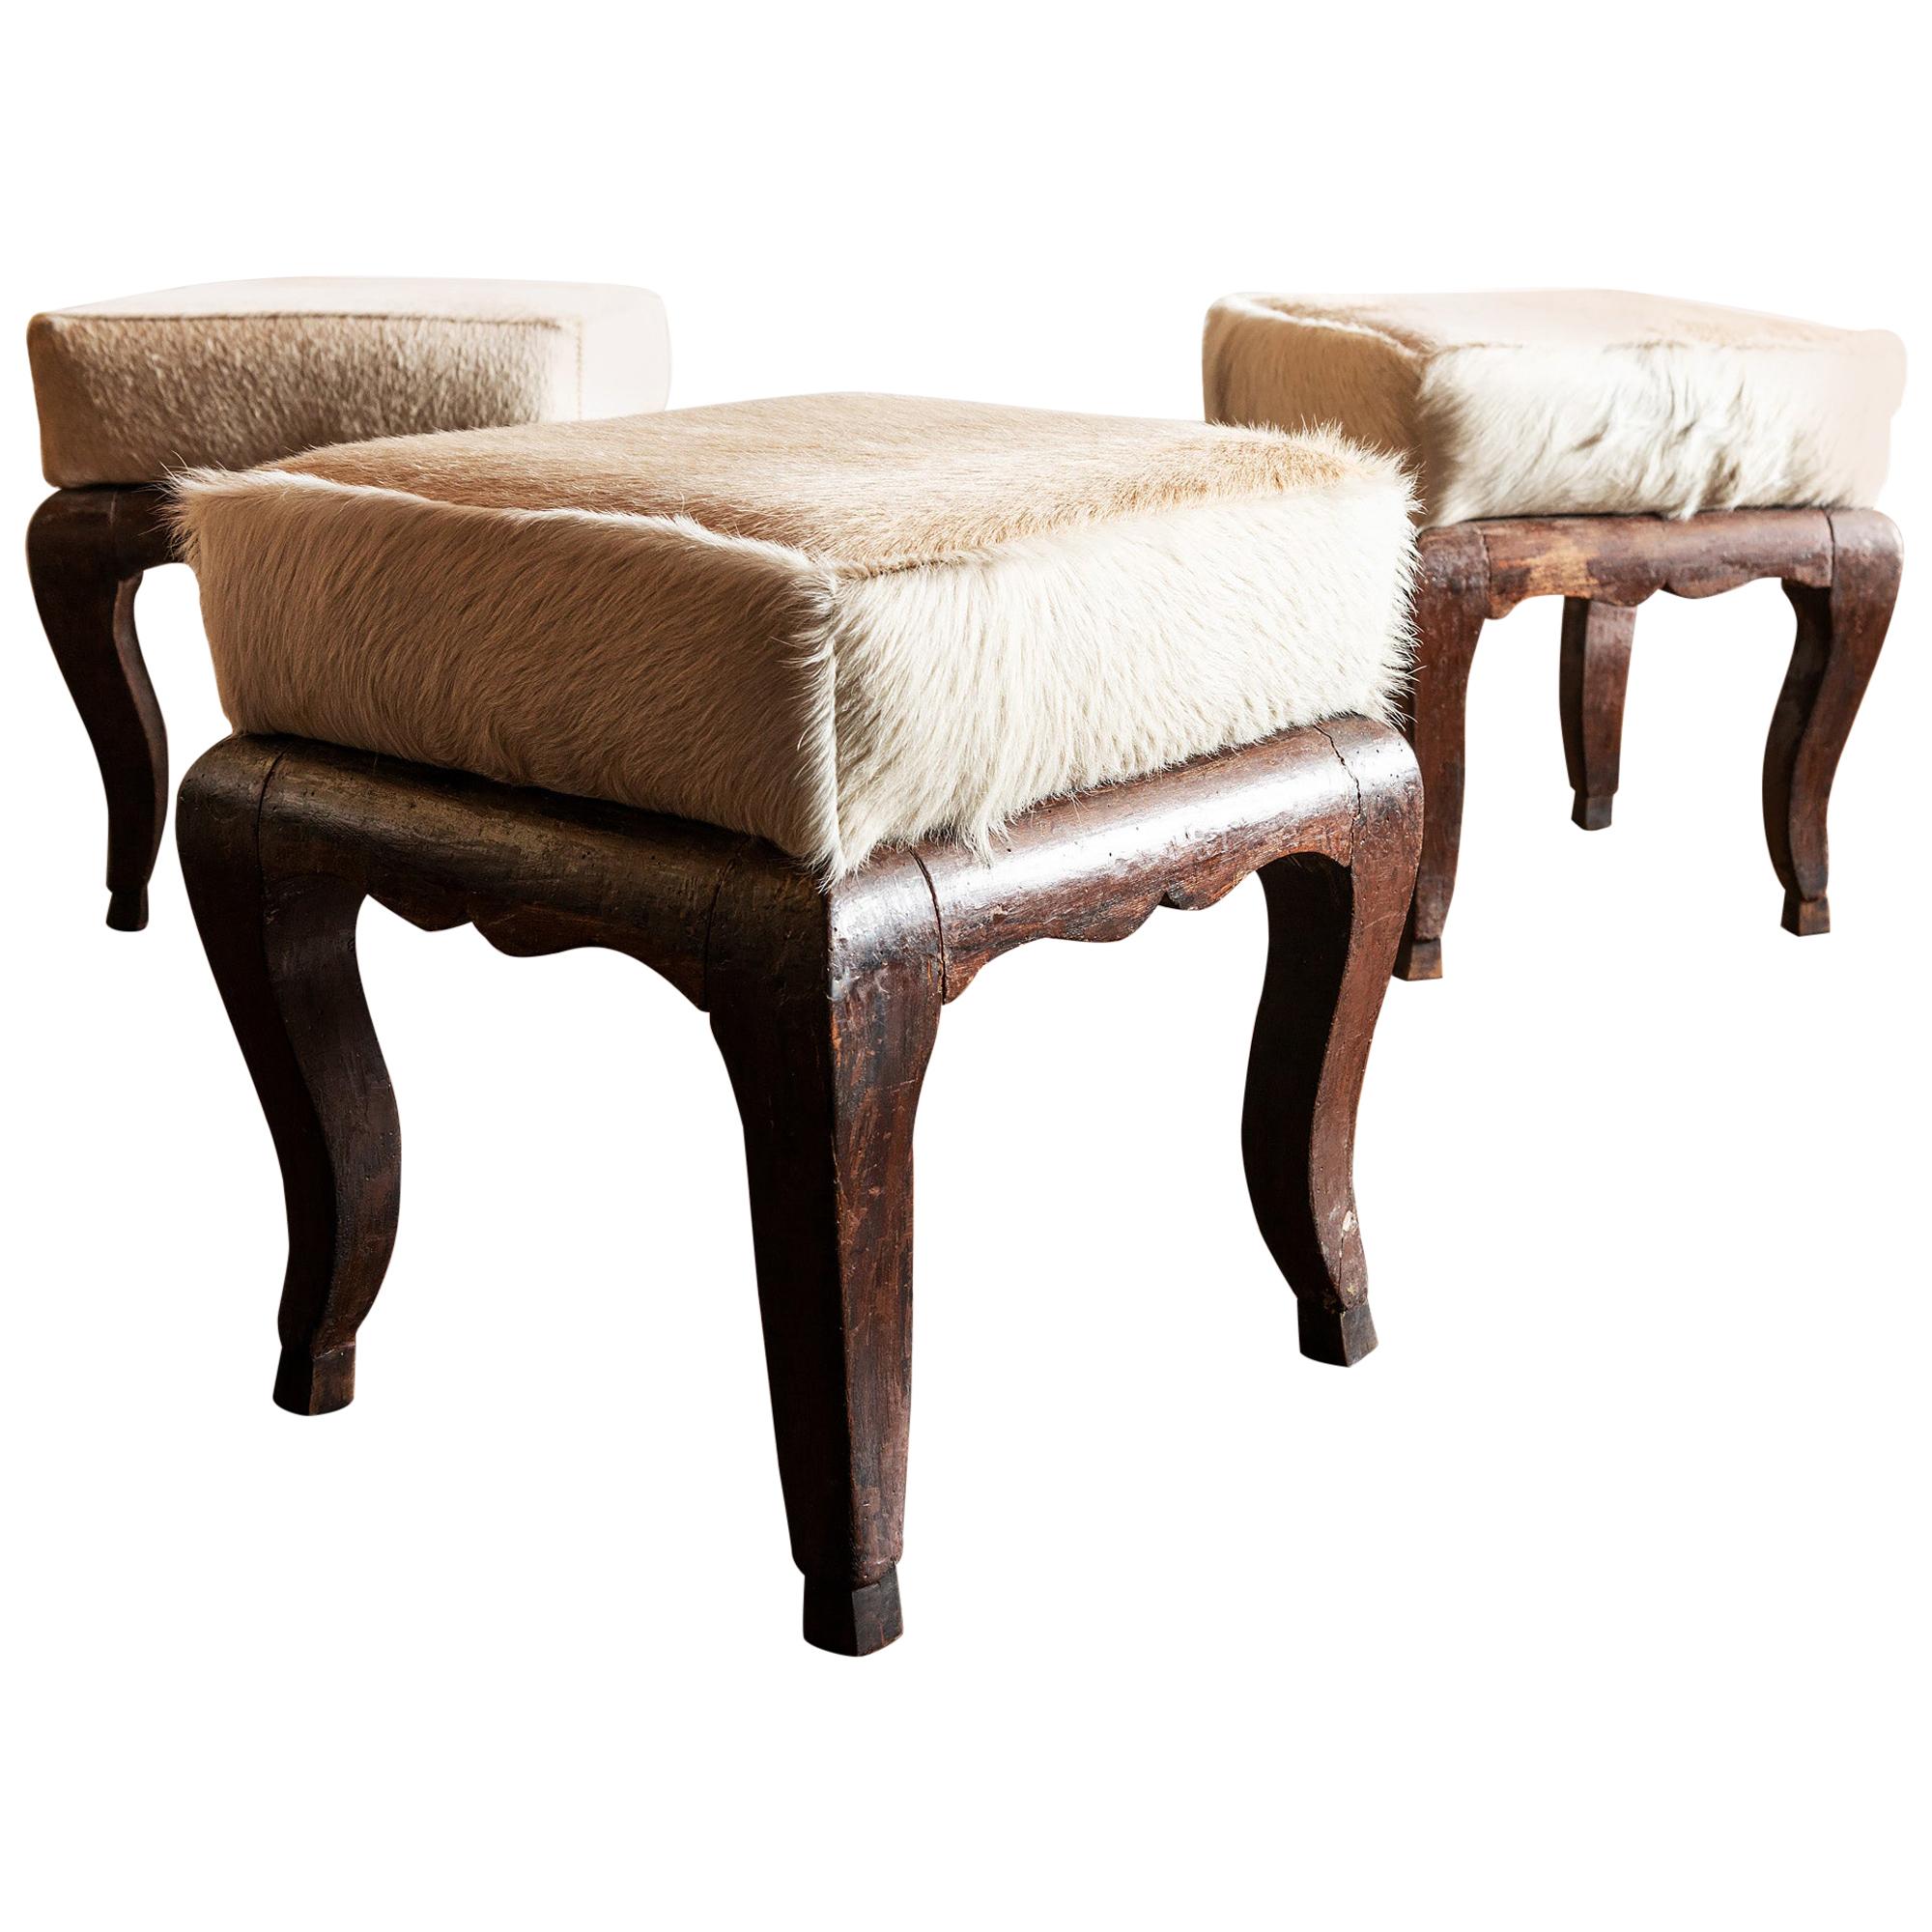 Pair of French 1900s Stools with Cowhide Seats